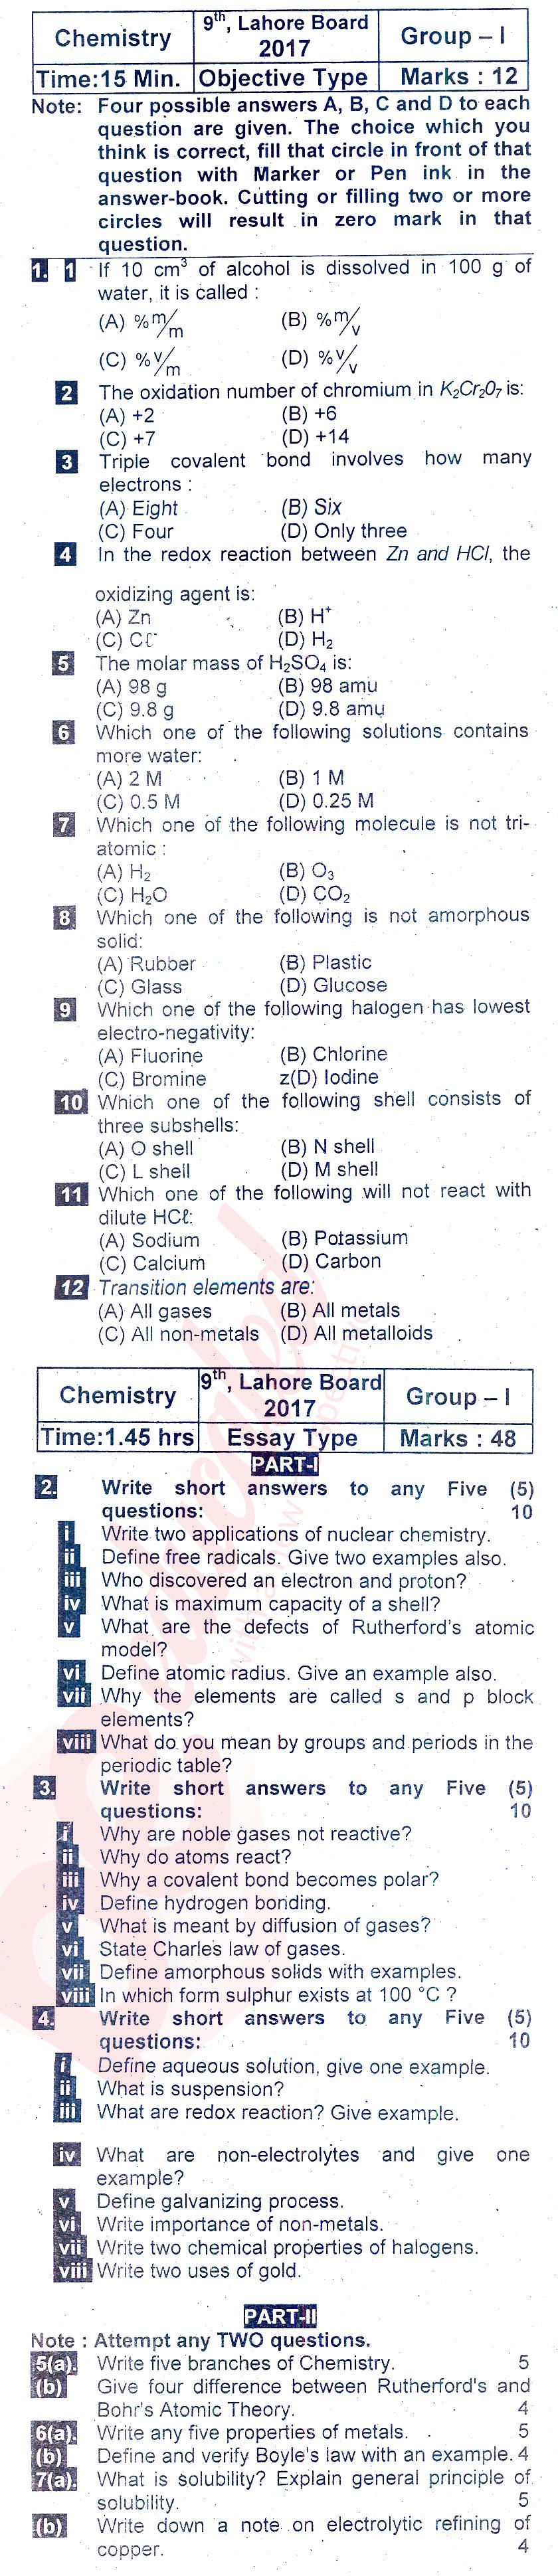 Chemistry 9th English Medium Past Paper Group 1 BISE Lahore 2017